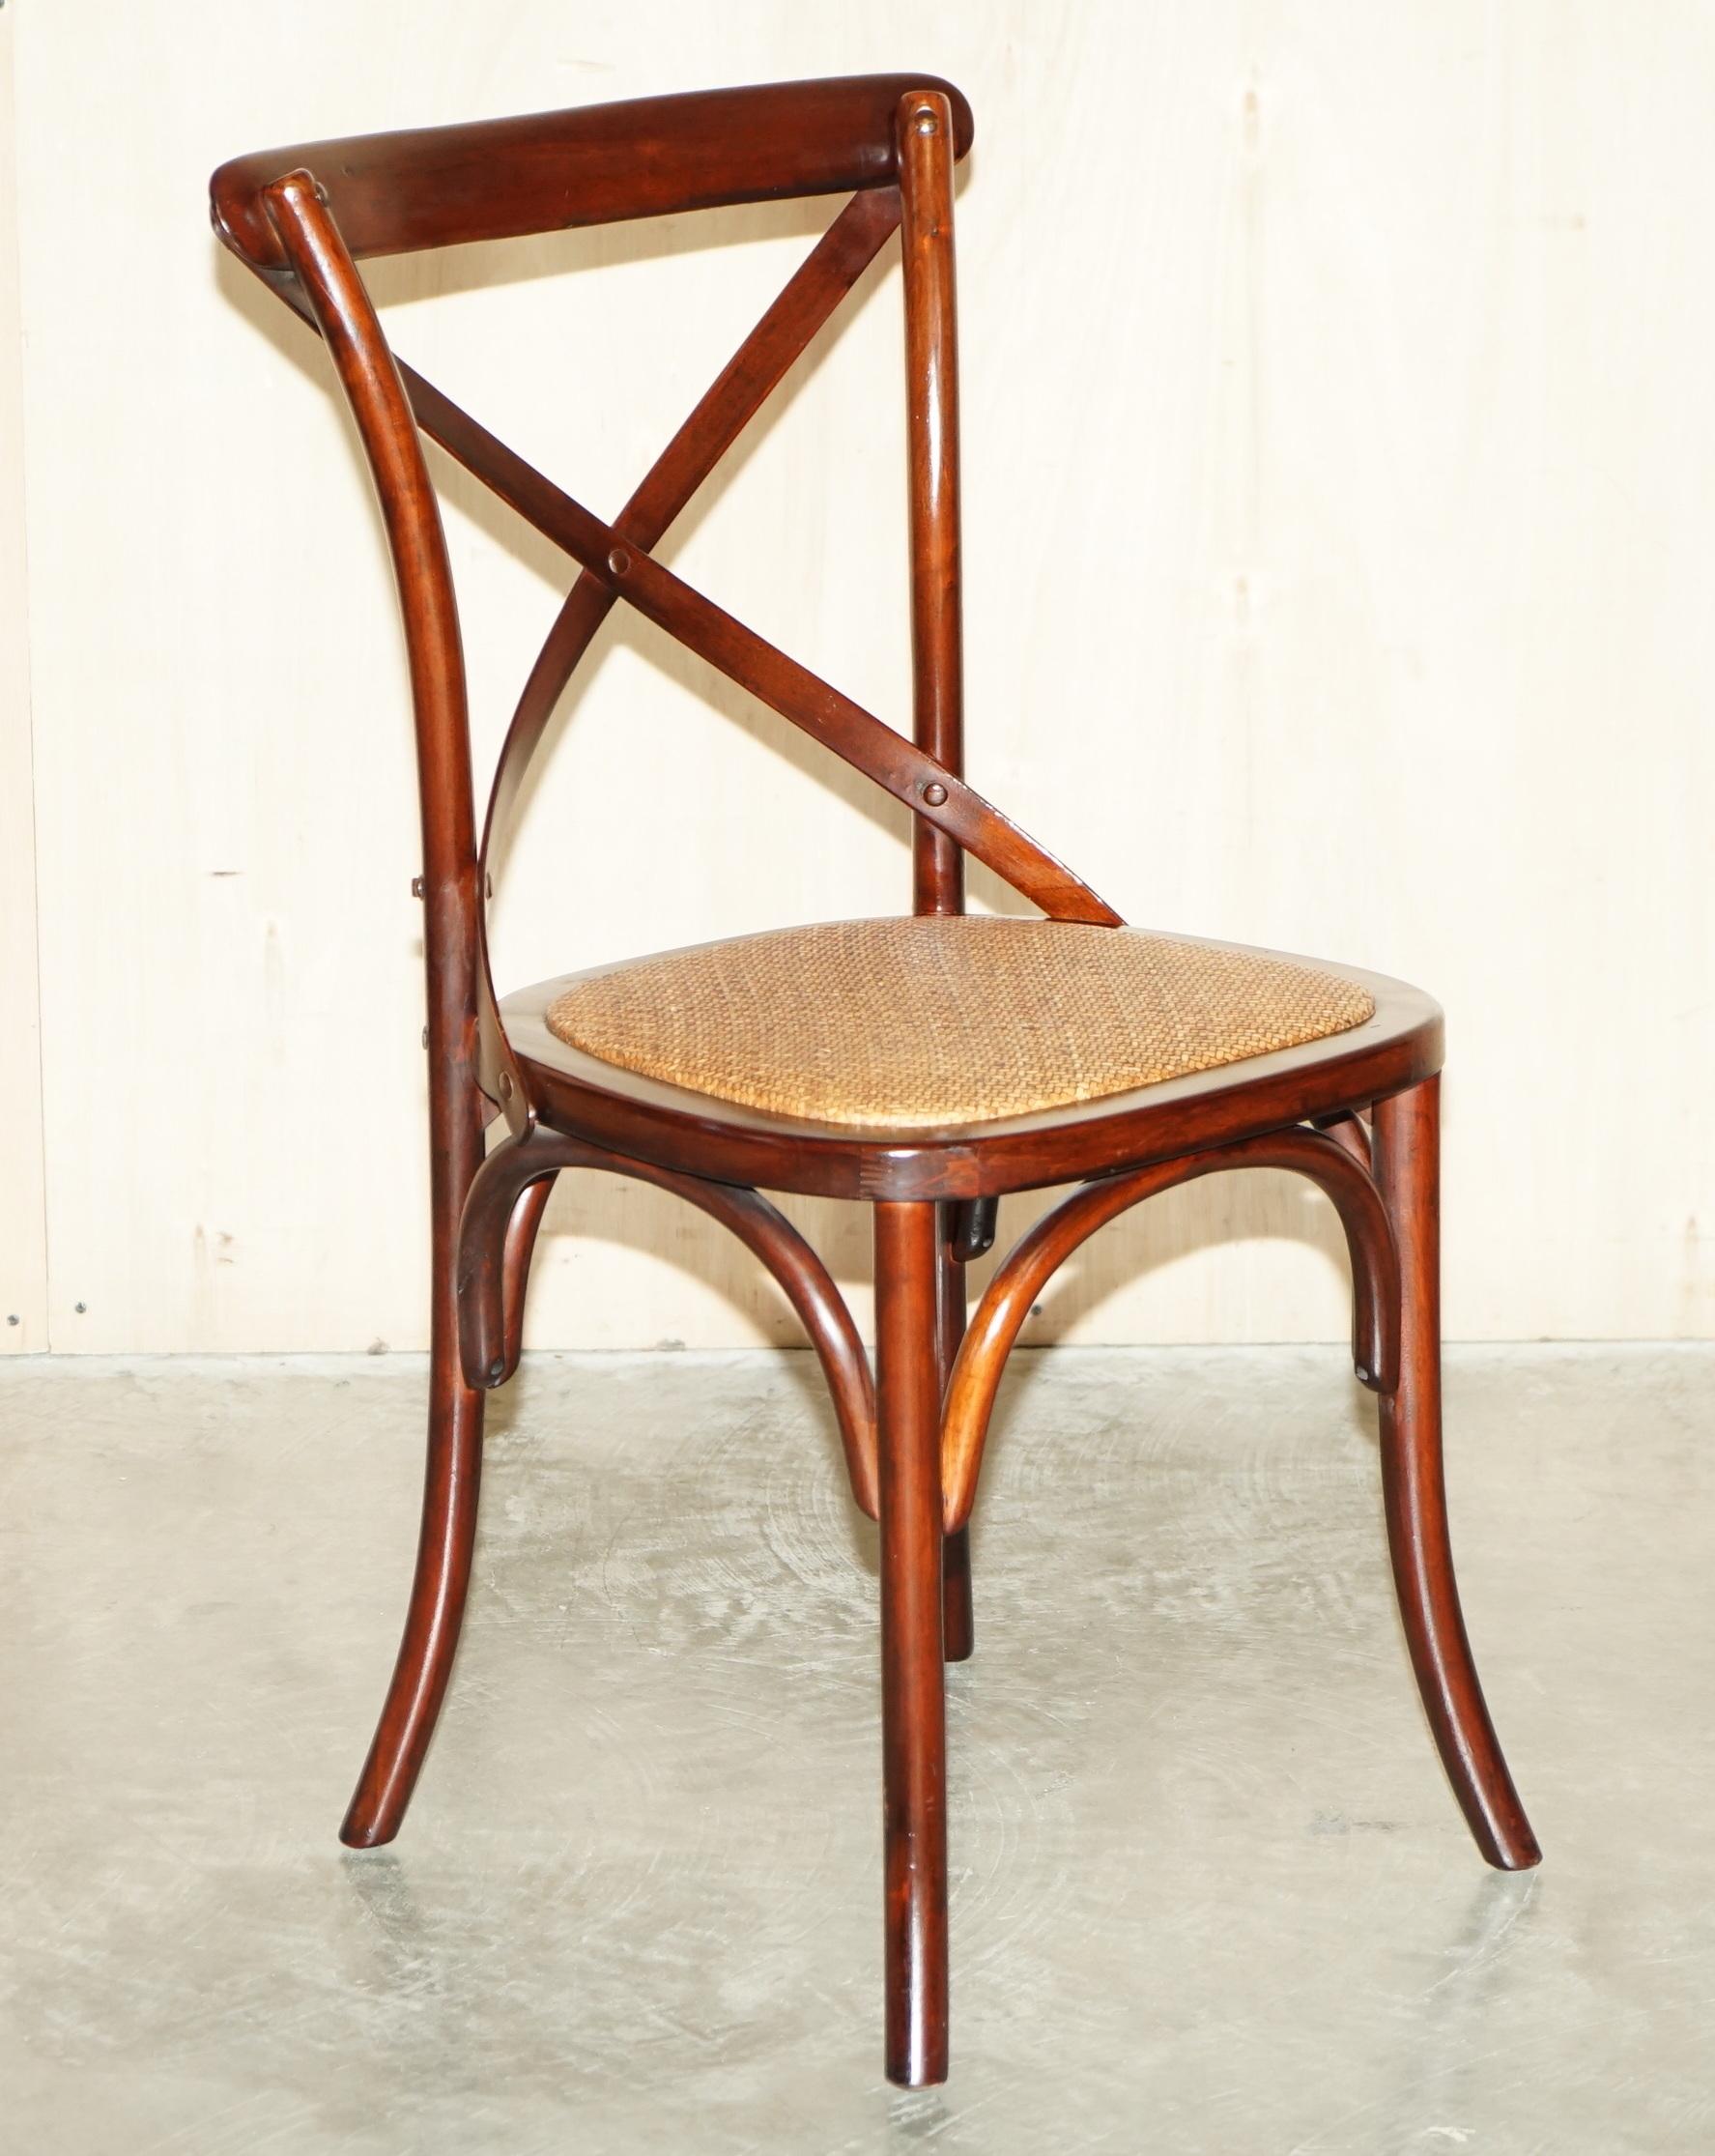 We are delighted to offer for sale this lovely suite of five Oka bentwood dining chairs with woven seat pads

A very good looking well made and decorative suite of chairs, they are made by Oka and are based on the original Thonet bentwood bistro